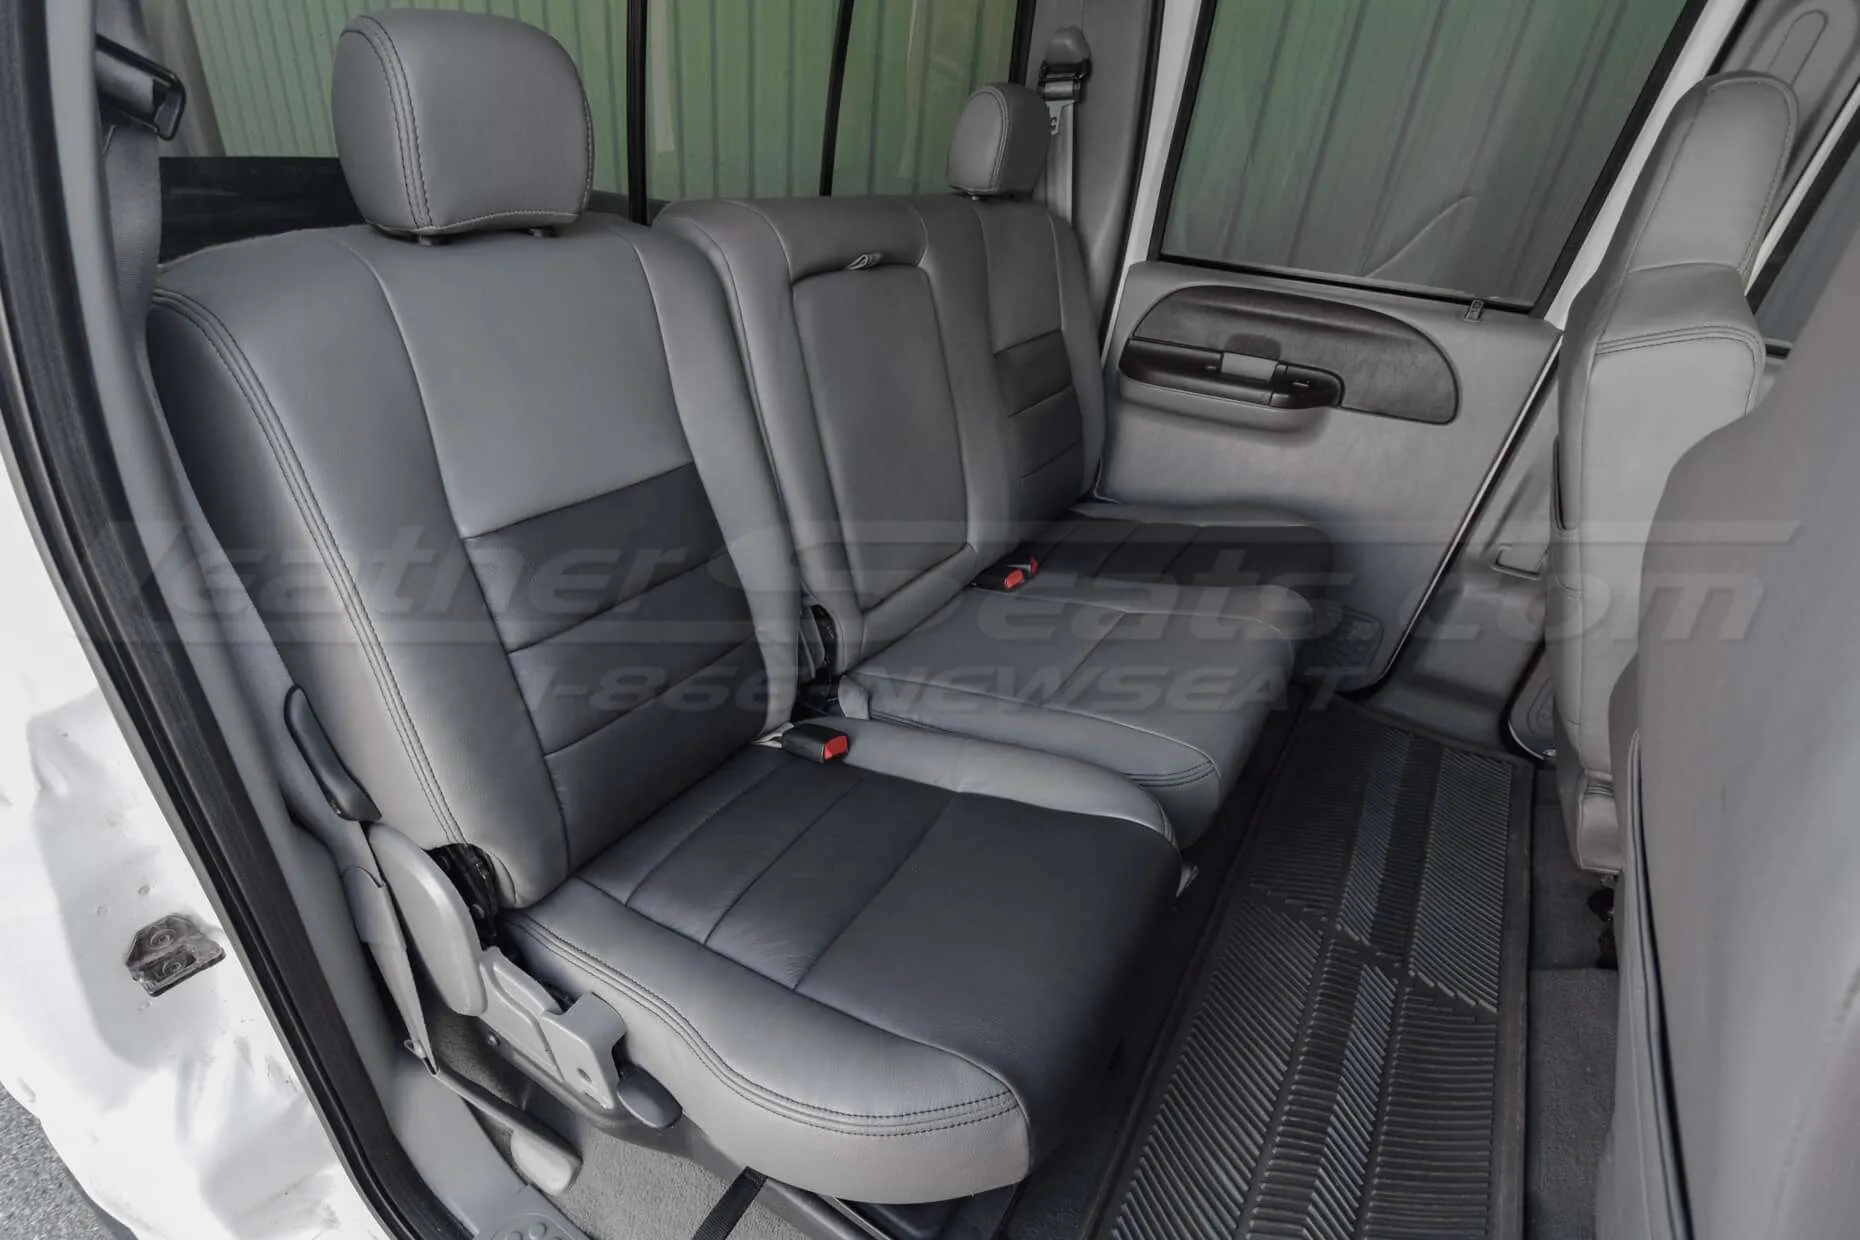 Ford Superduty installed leather seats in light grey and graphite - rear seats from passenger side